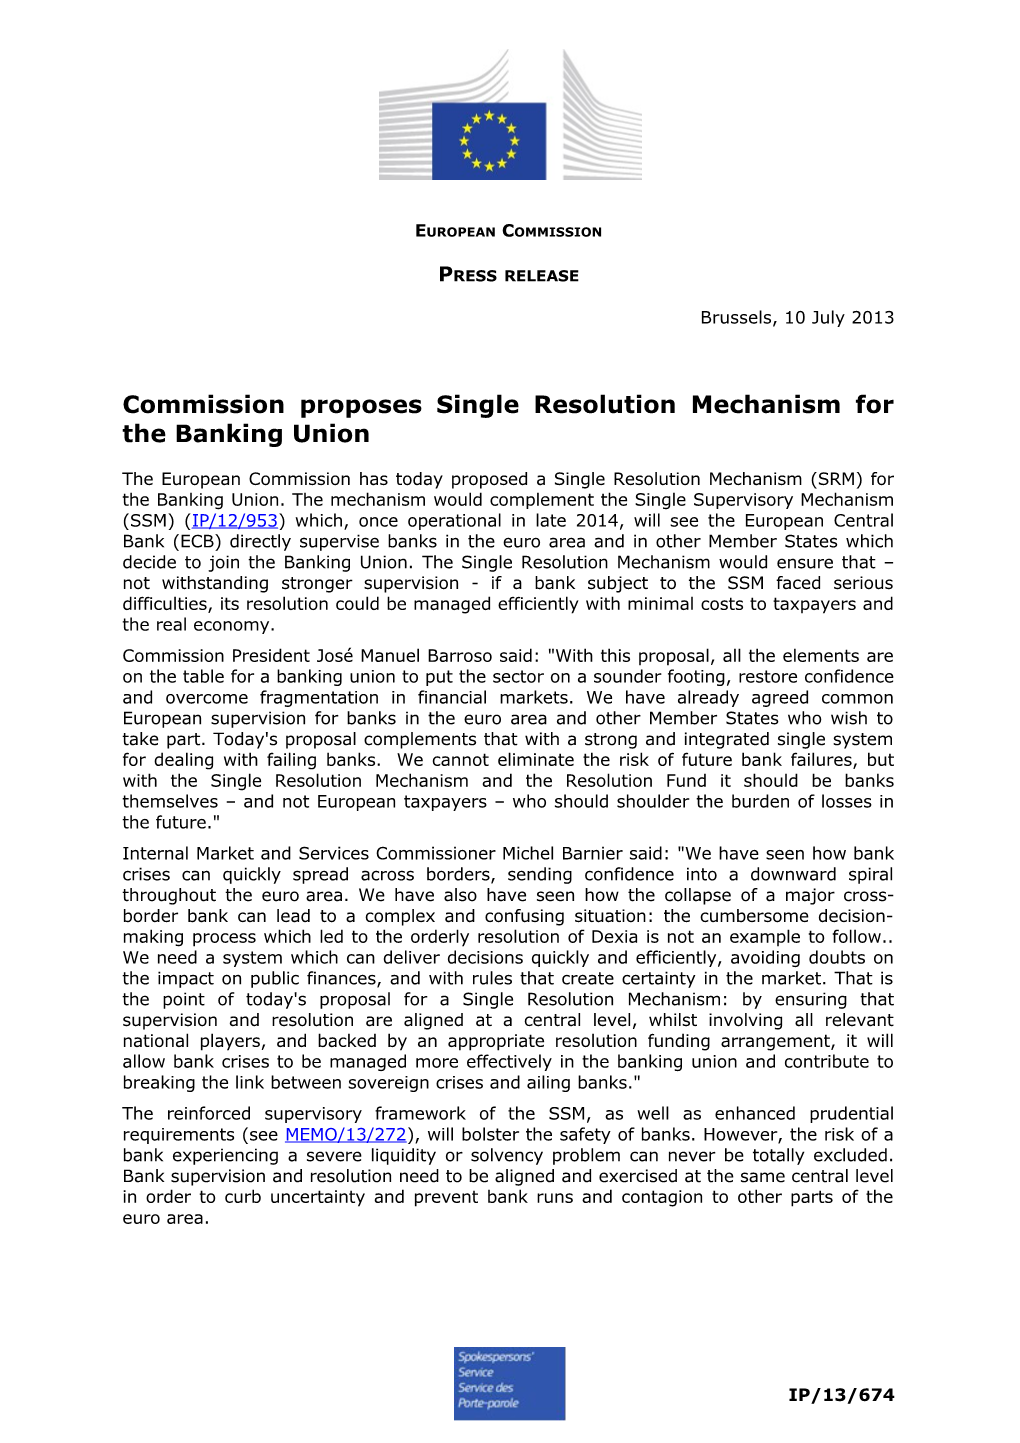 Commission Proposes Single Resolution Mechanismfor the Banking Union